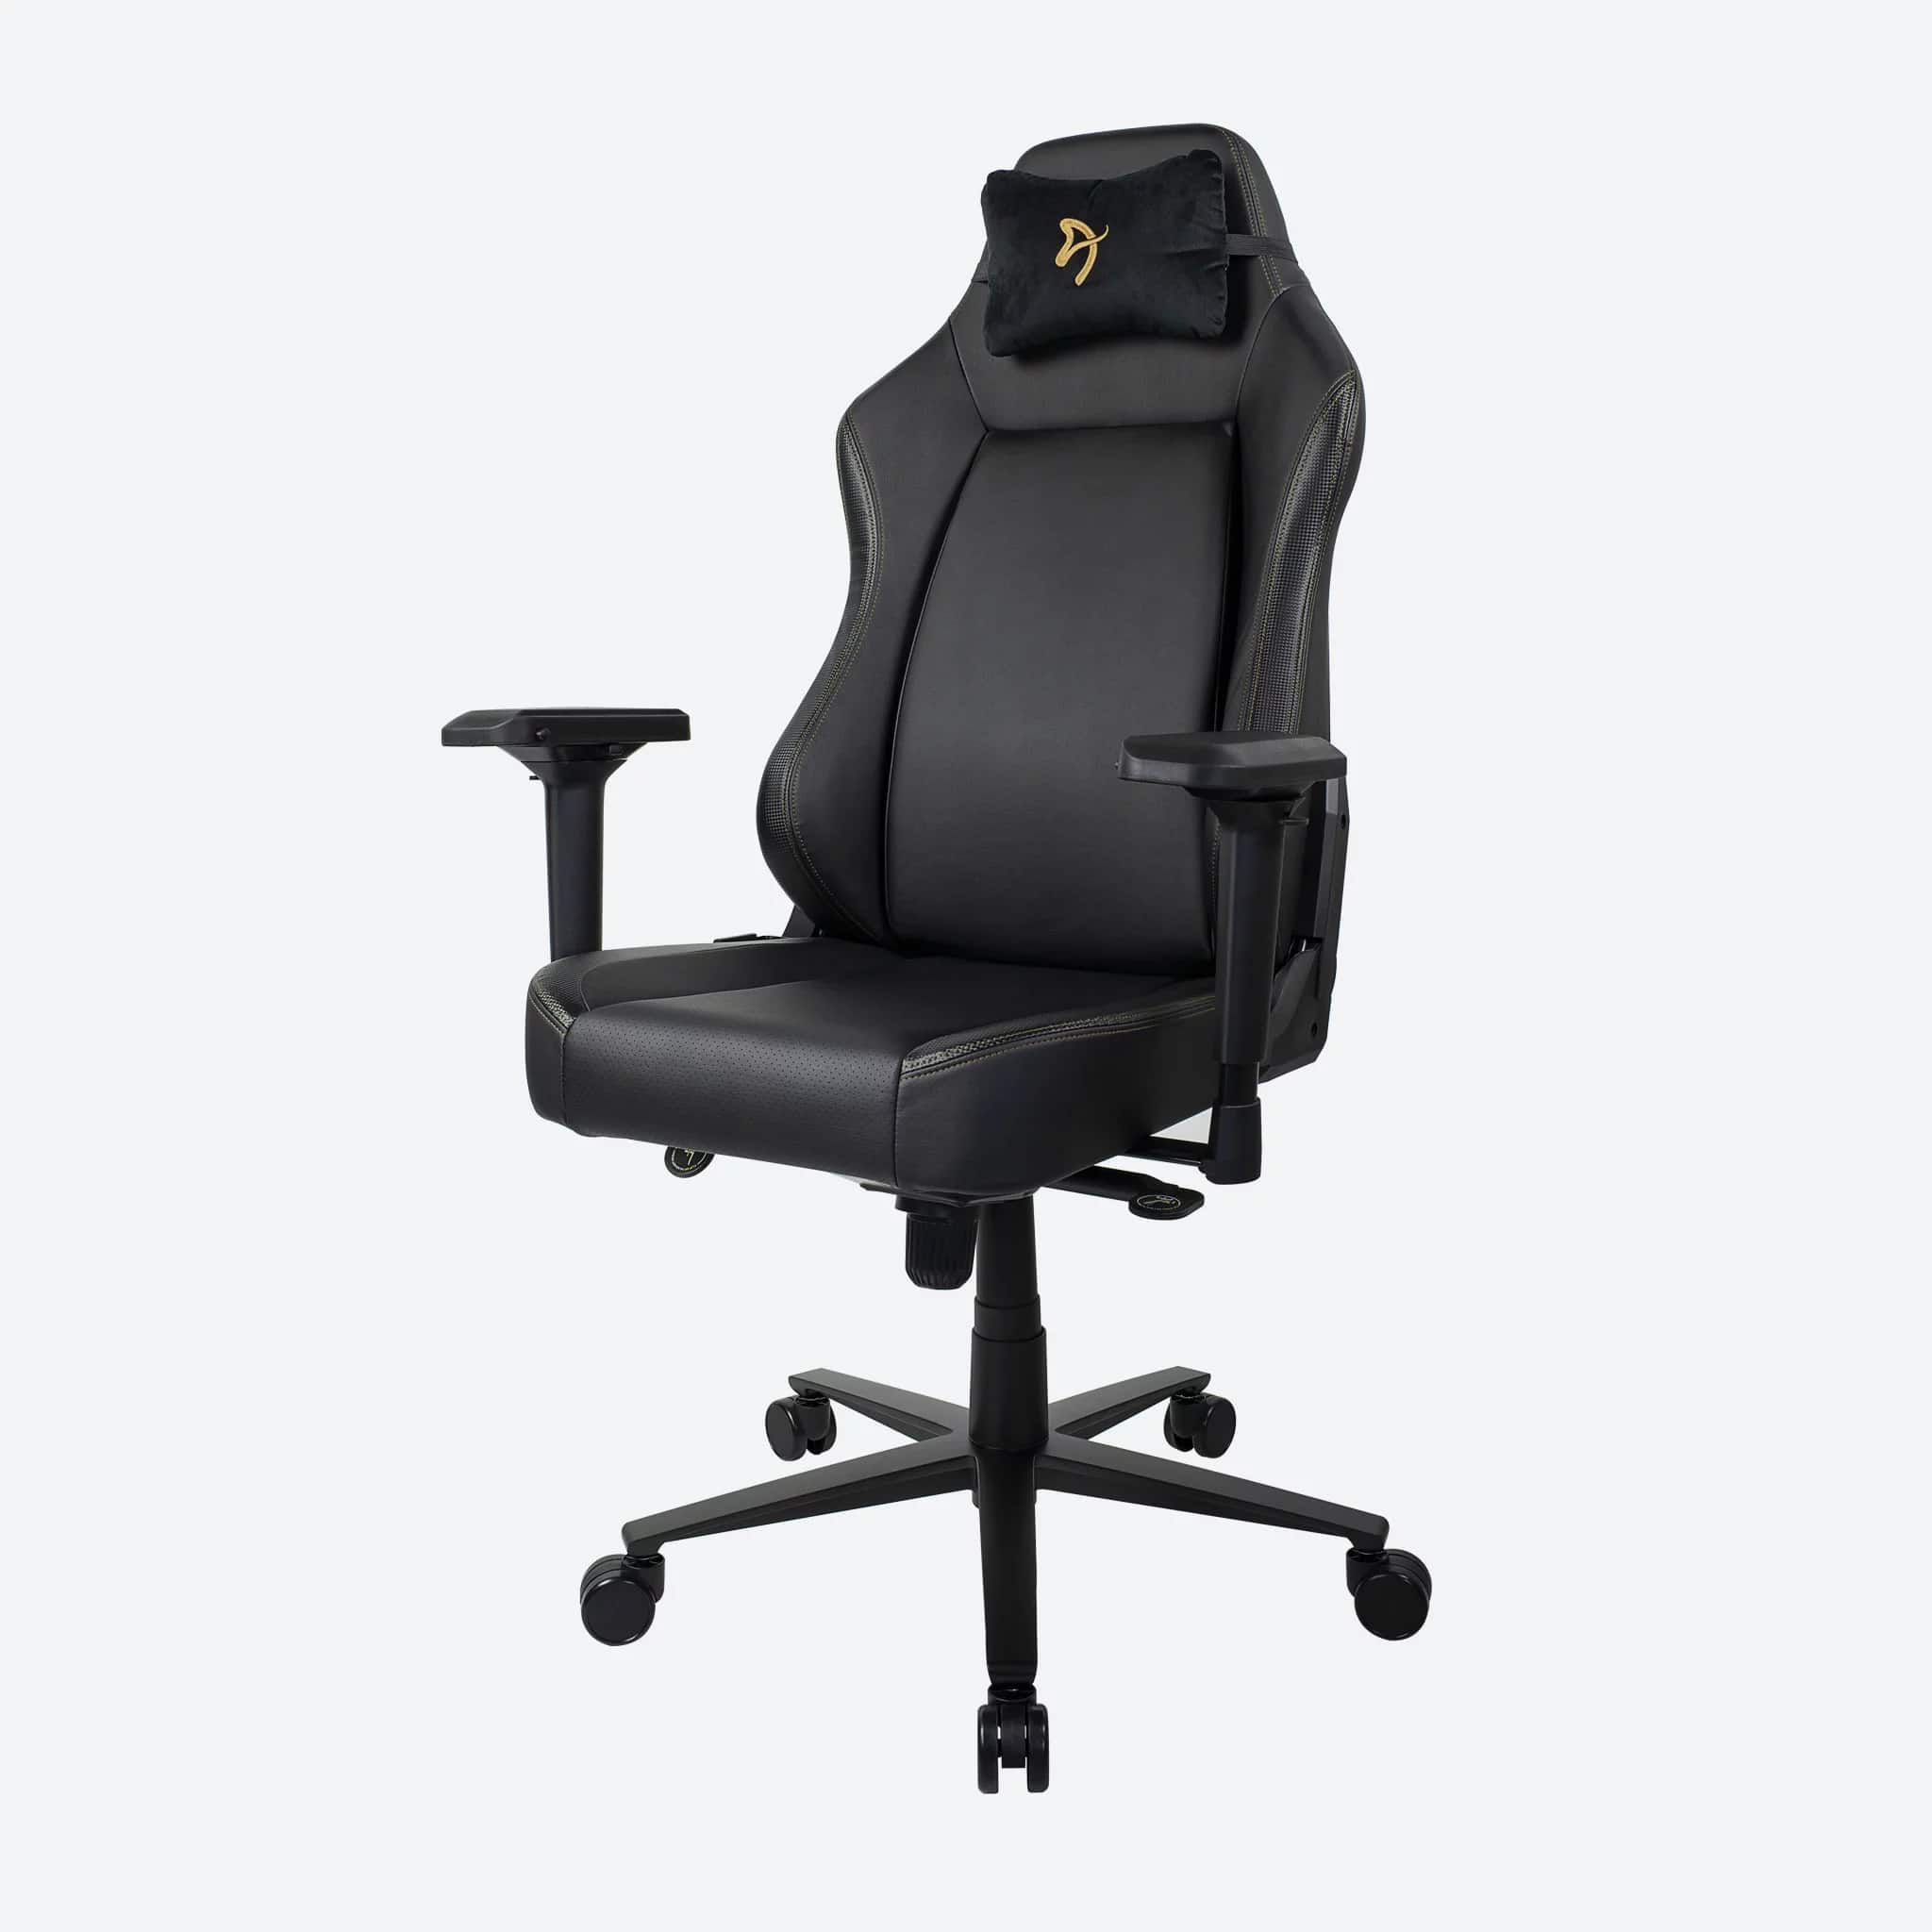 Arozzi Primo PU Leather Gaming Chair - Gold Logo